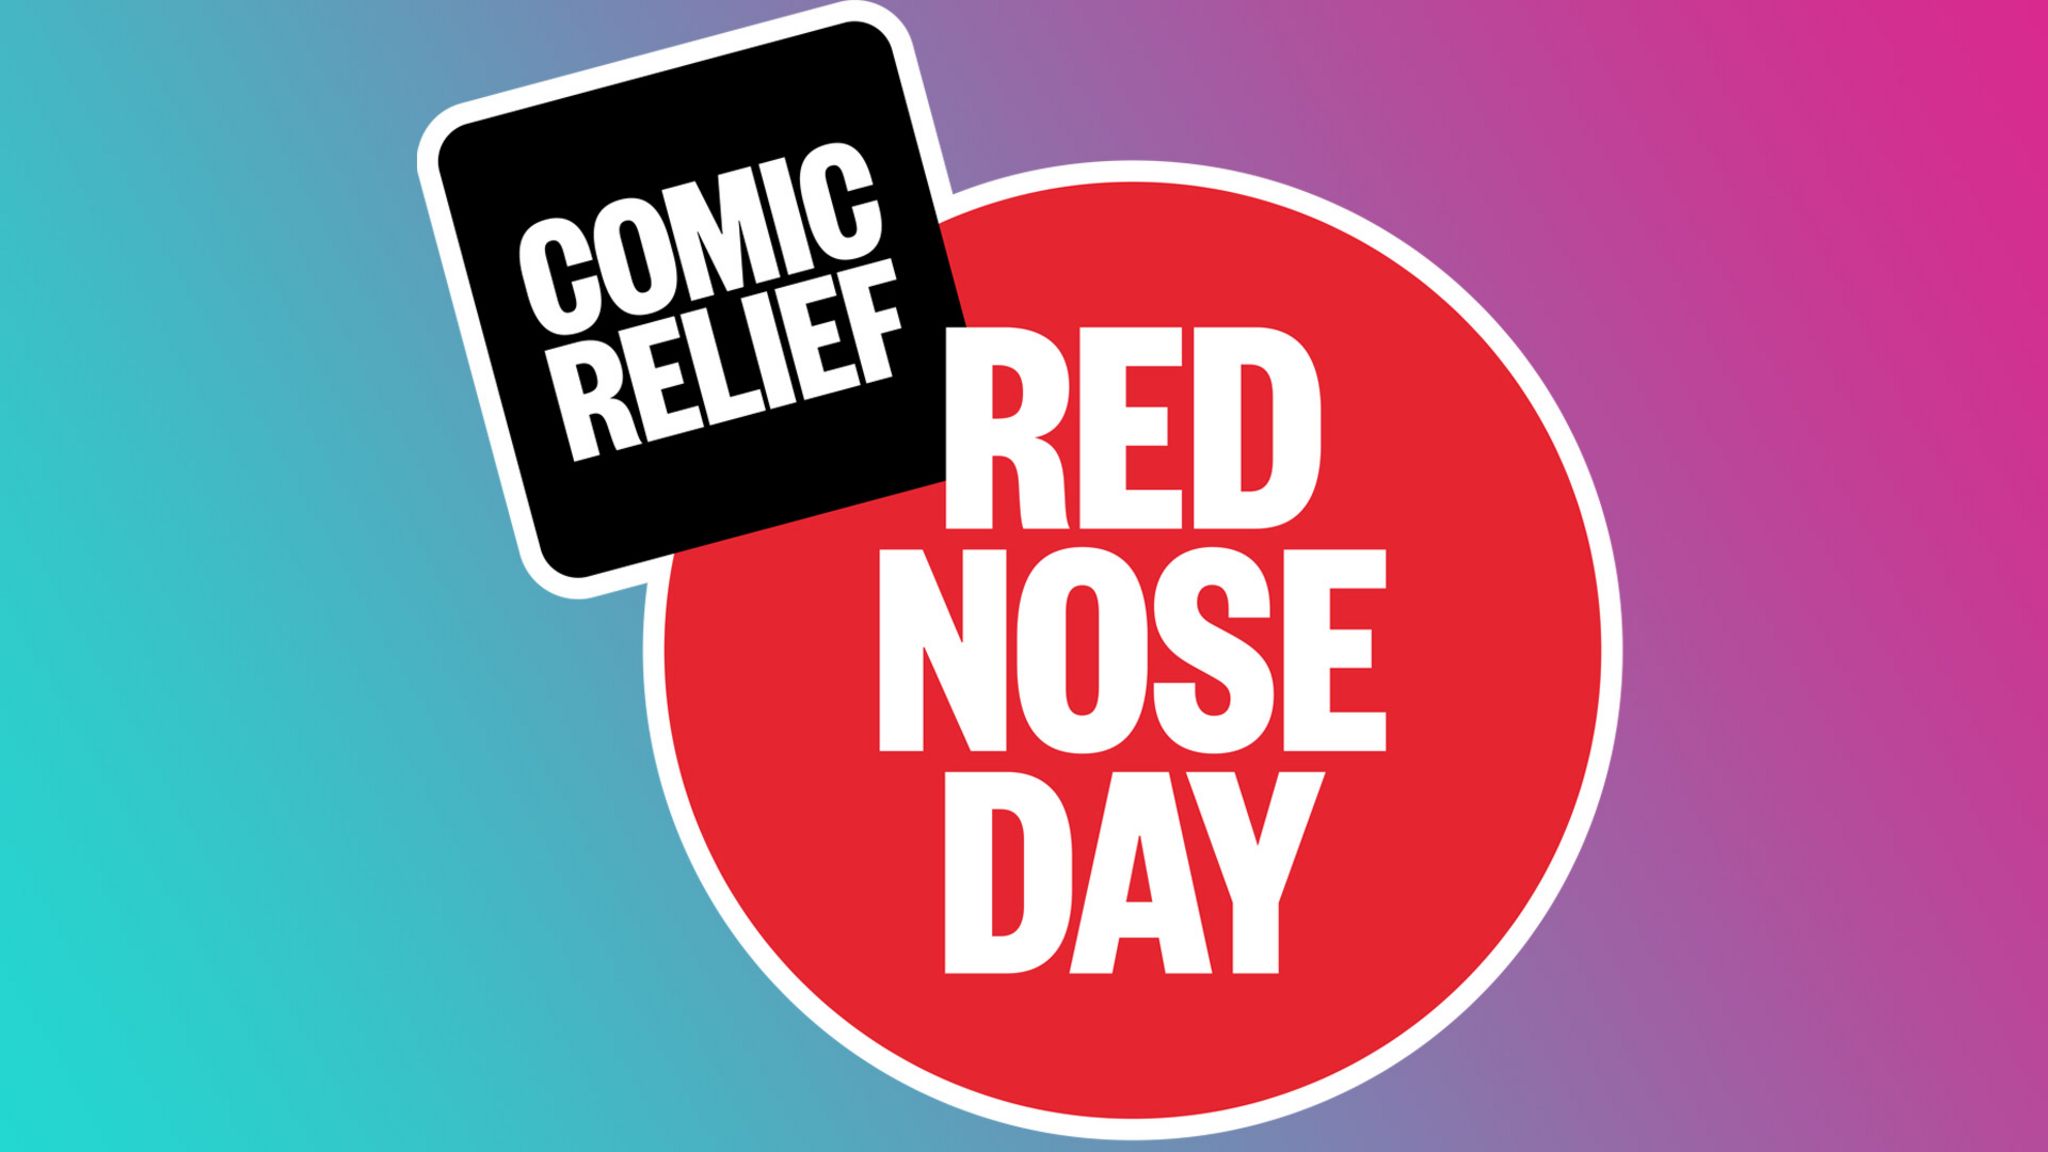 Red nose day comic relief logo